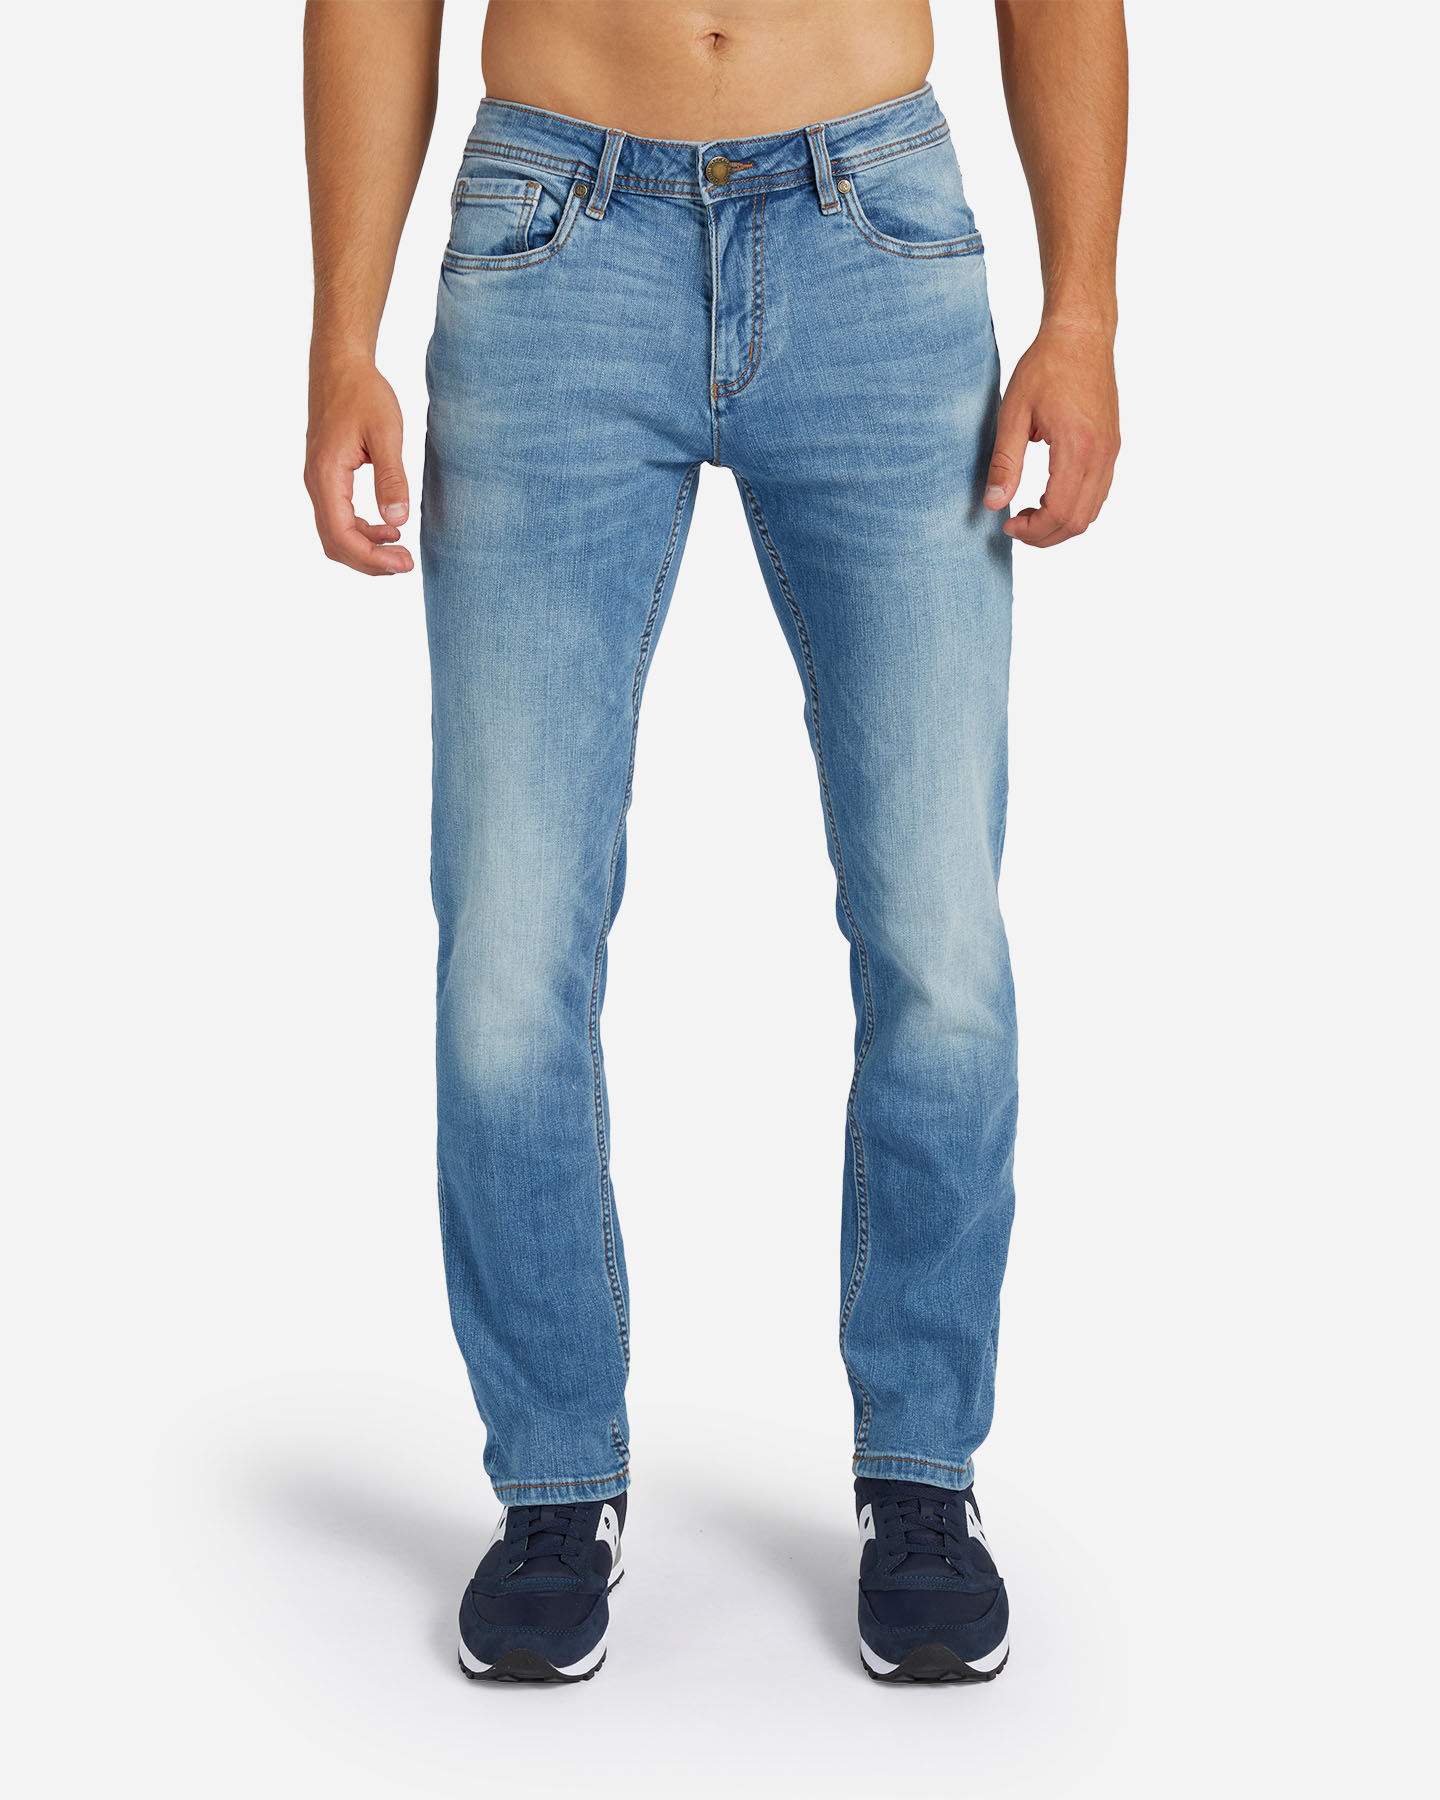  Jeans DACK'S CASUAL CITY M S4106779|MD|46 scatto 0